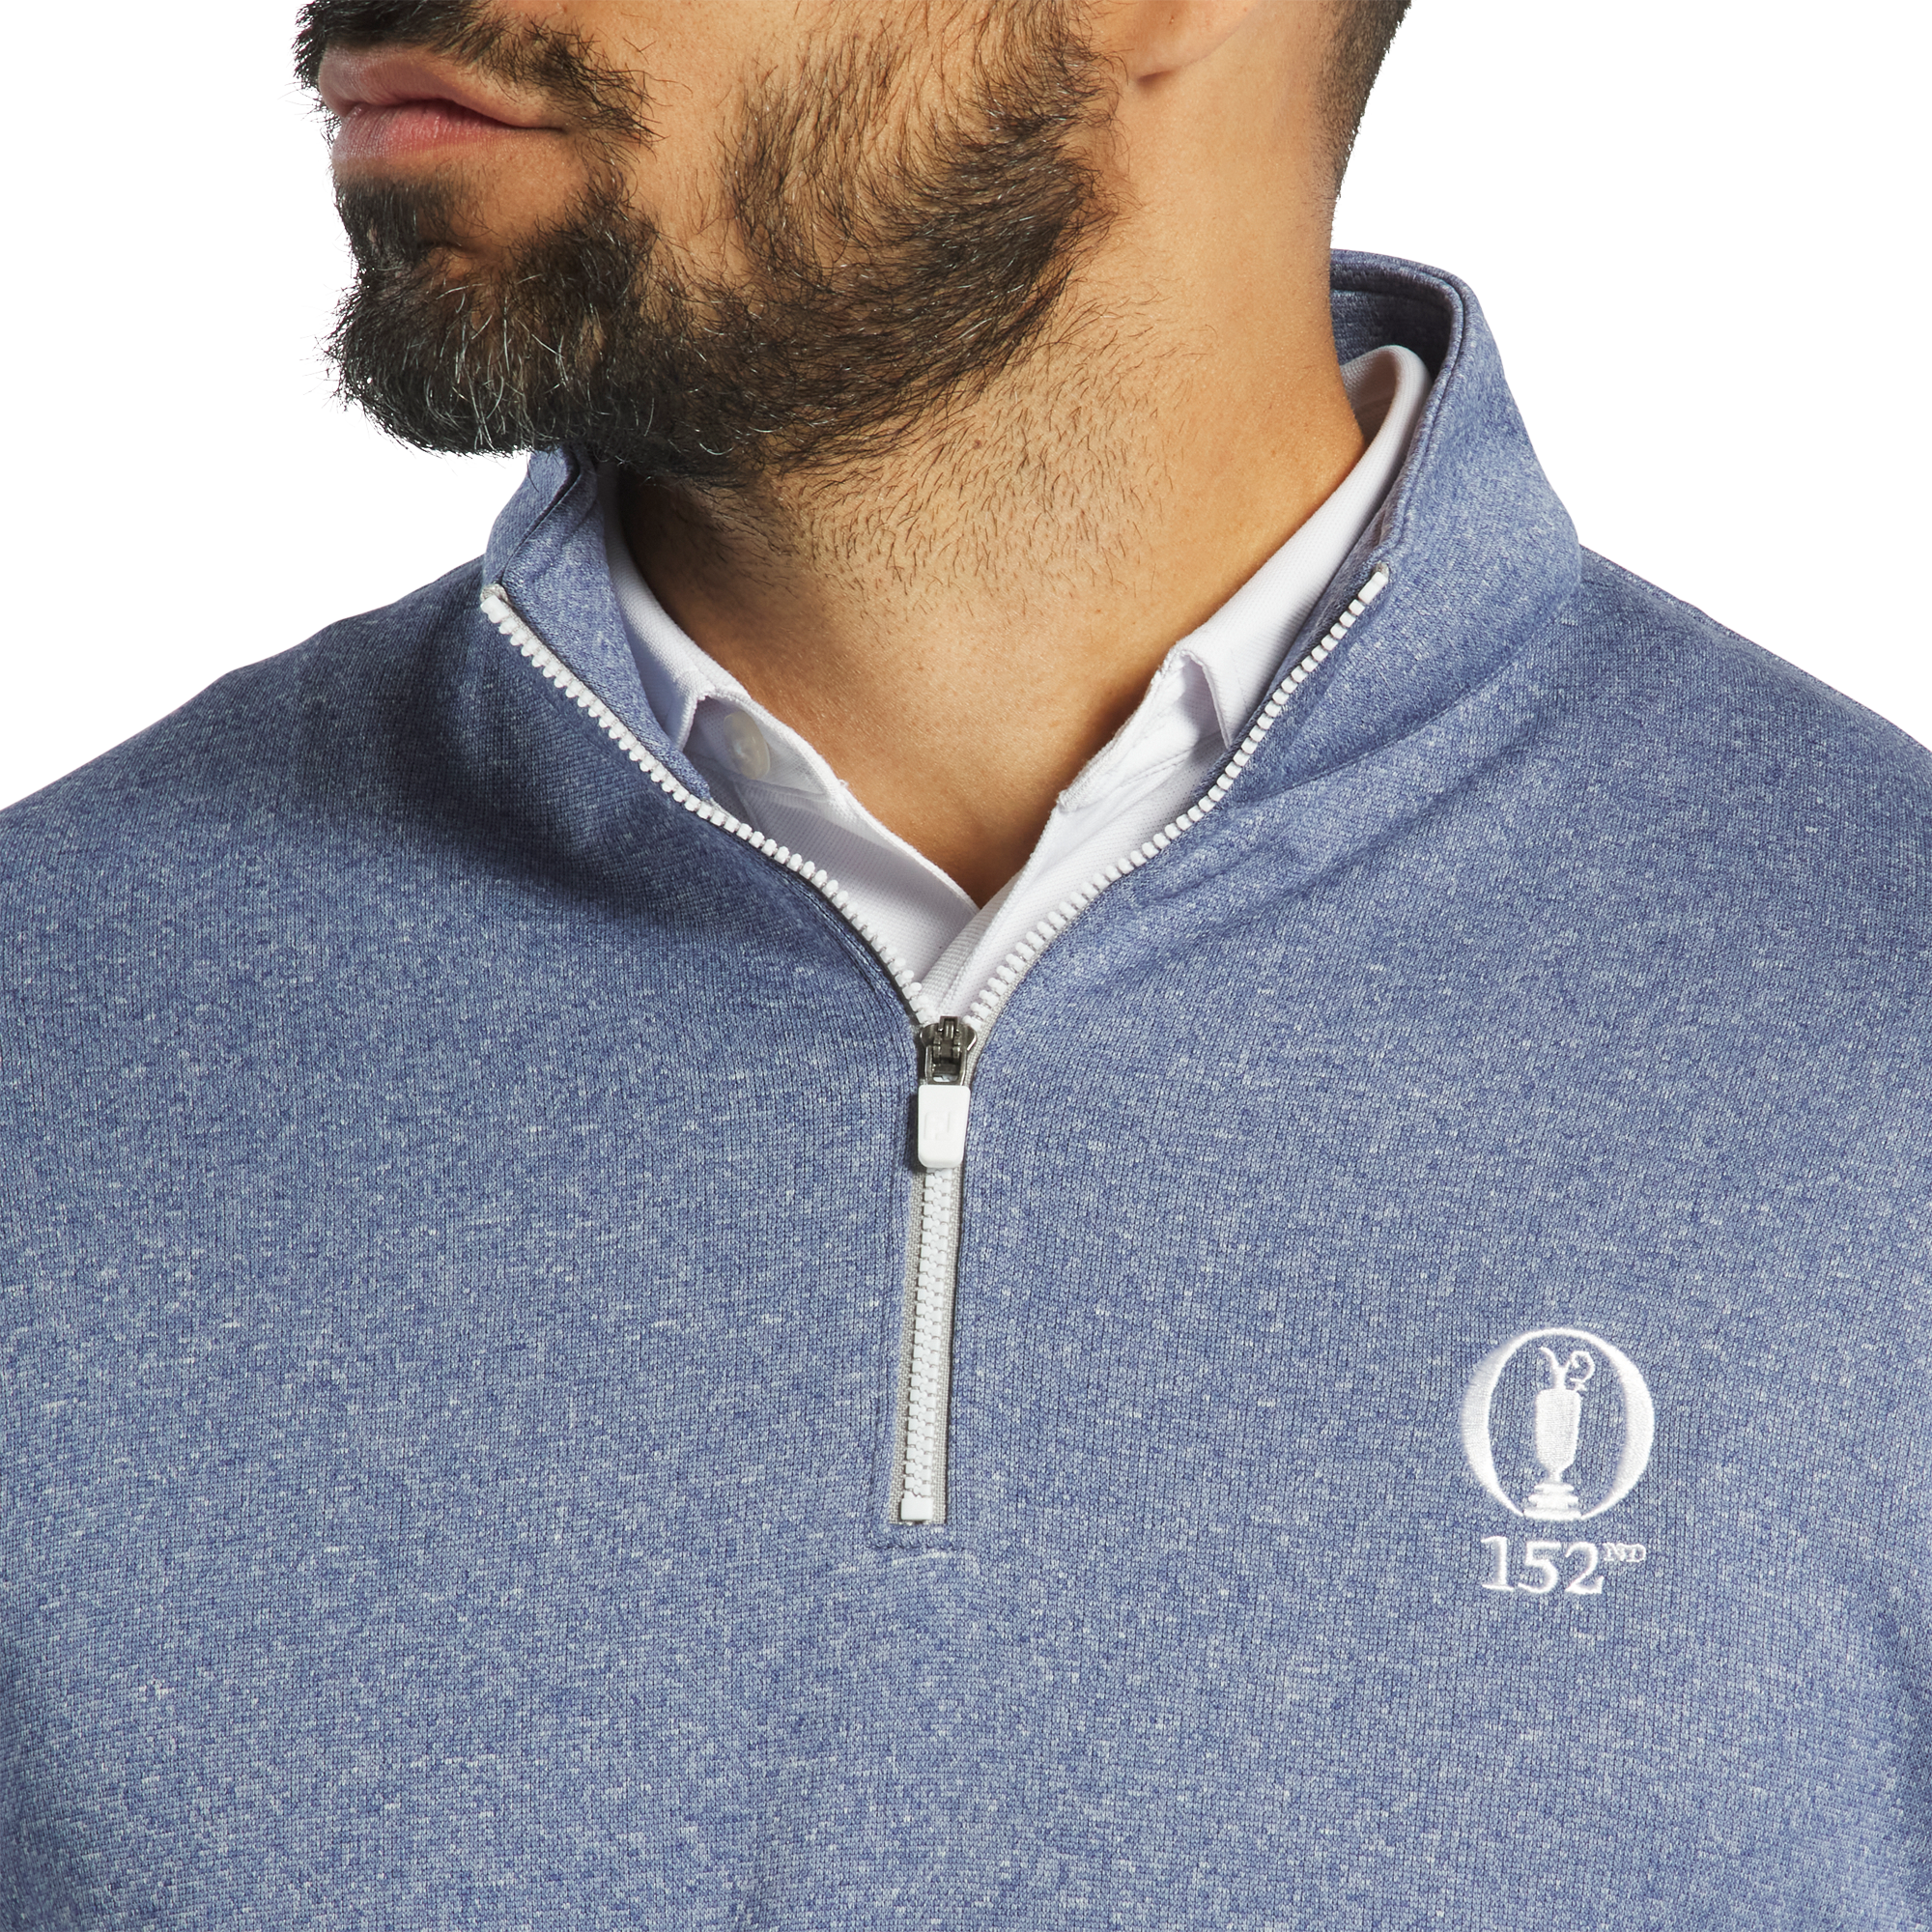 152:a Open Championship Ribbed Quarter Zip Chill-Out